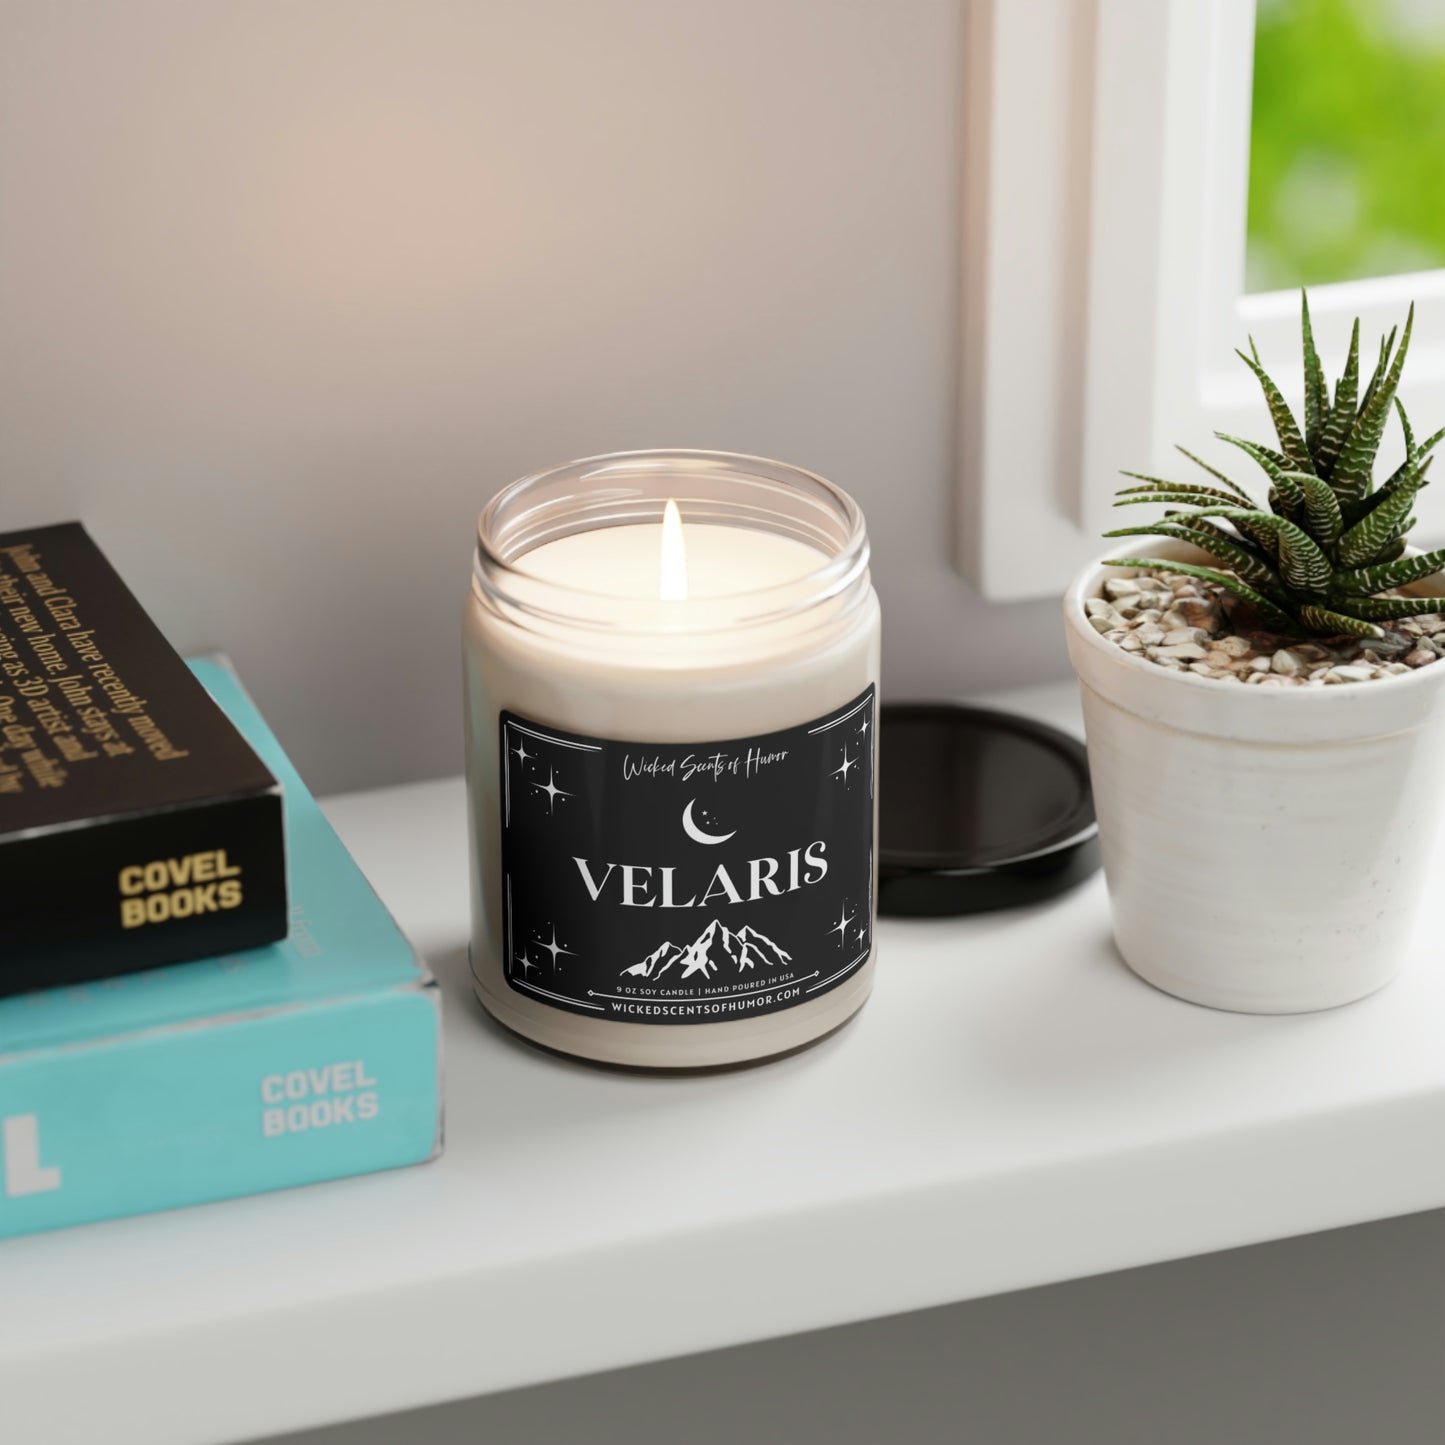 VELARIS Soy Candle, acotar, acomaf, Book Lover Candle, Book Scented Candle, Literary Candle, Book Inspired Candle, Book Candle Scent